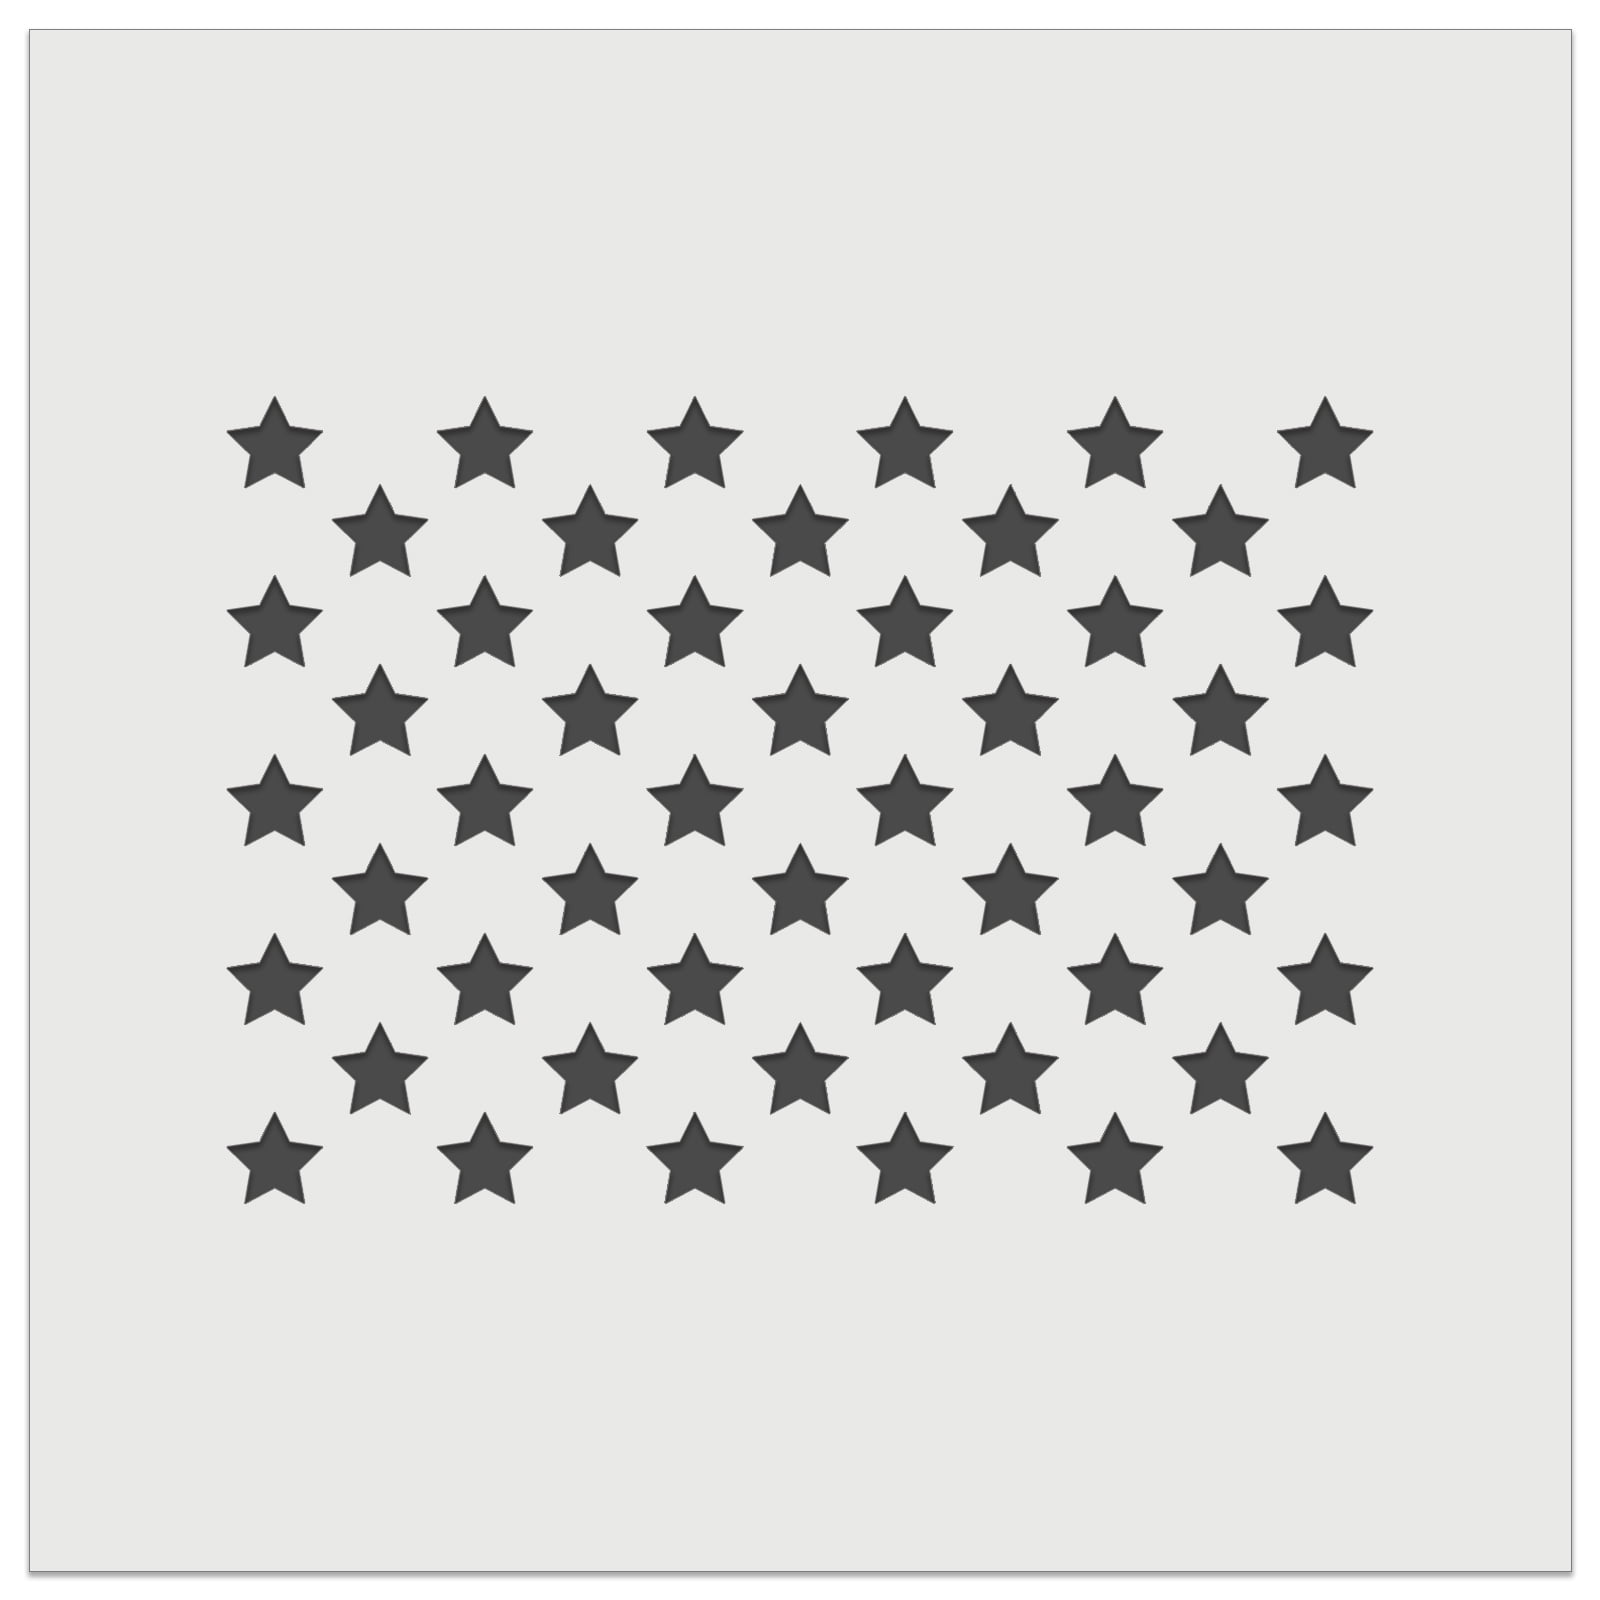 American Flag 50 Star Stencil Template 10.5*14.82" Painting on Wood ge* wangg2 